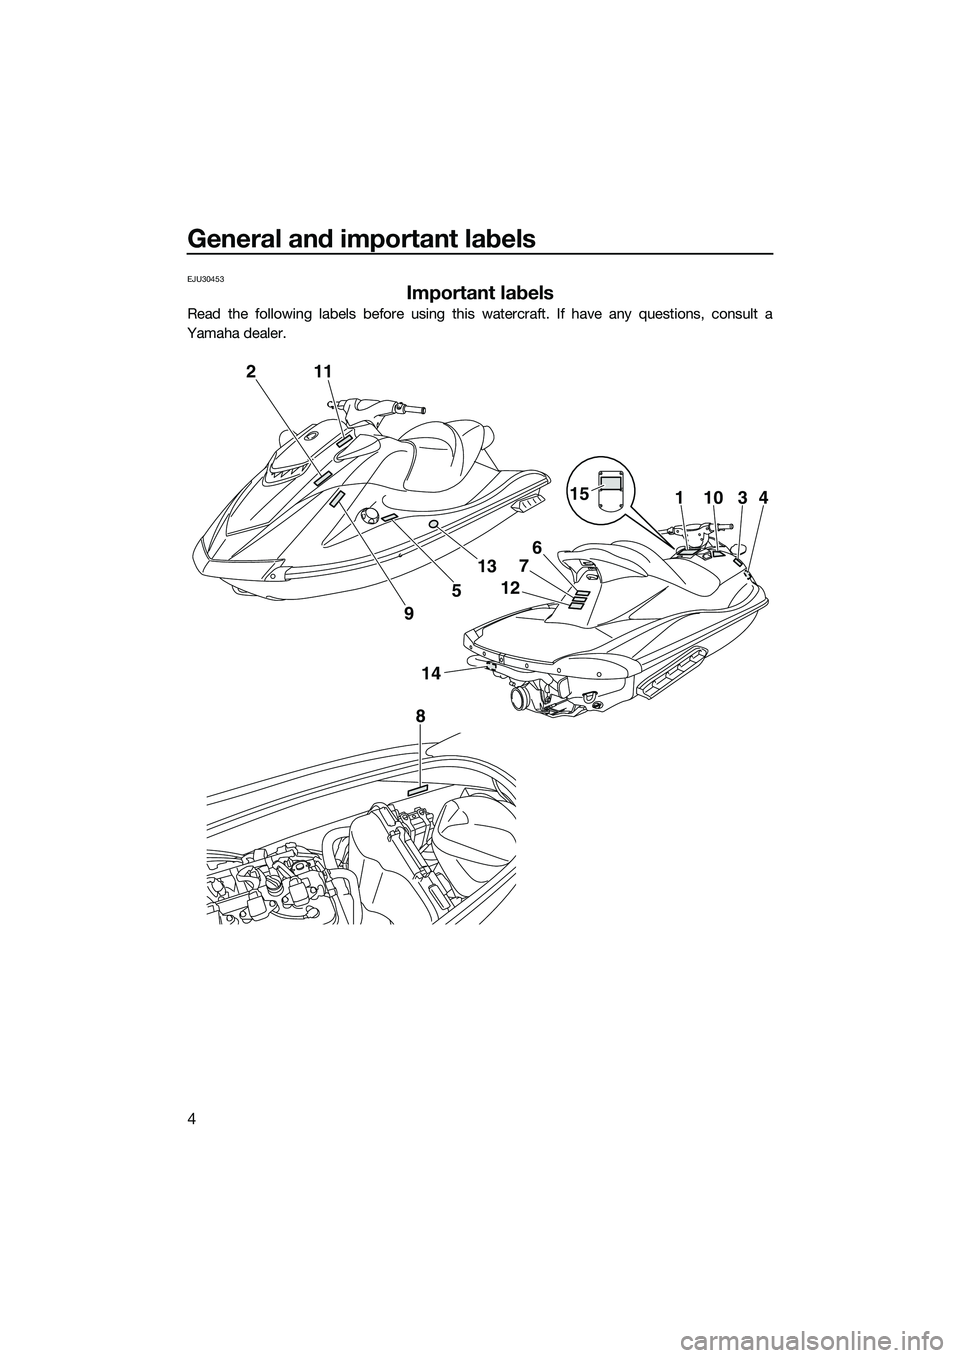 YAMAHA VXR 2014  Owners Manual General and important labels
4
EJU30453
Important labels
Read the following labels before using this watercraft. If have any questions, consult a
Yamaha dealer.
2
14
8
15
6
7
12
11034
11
9
5
13
UF2M73